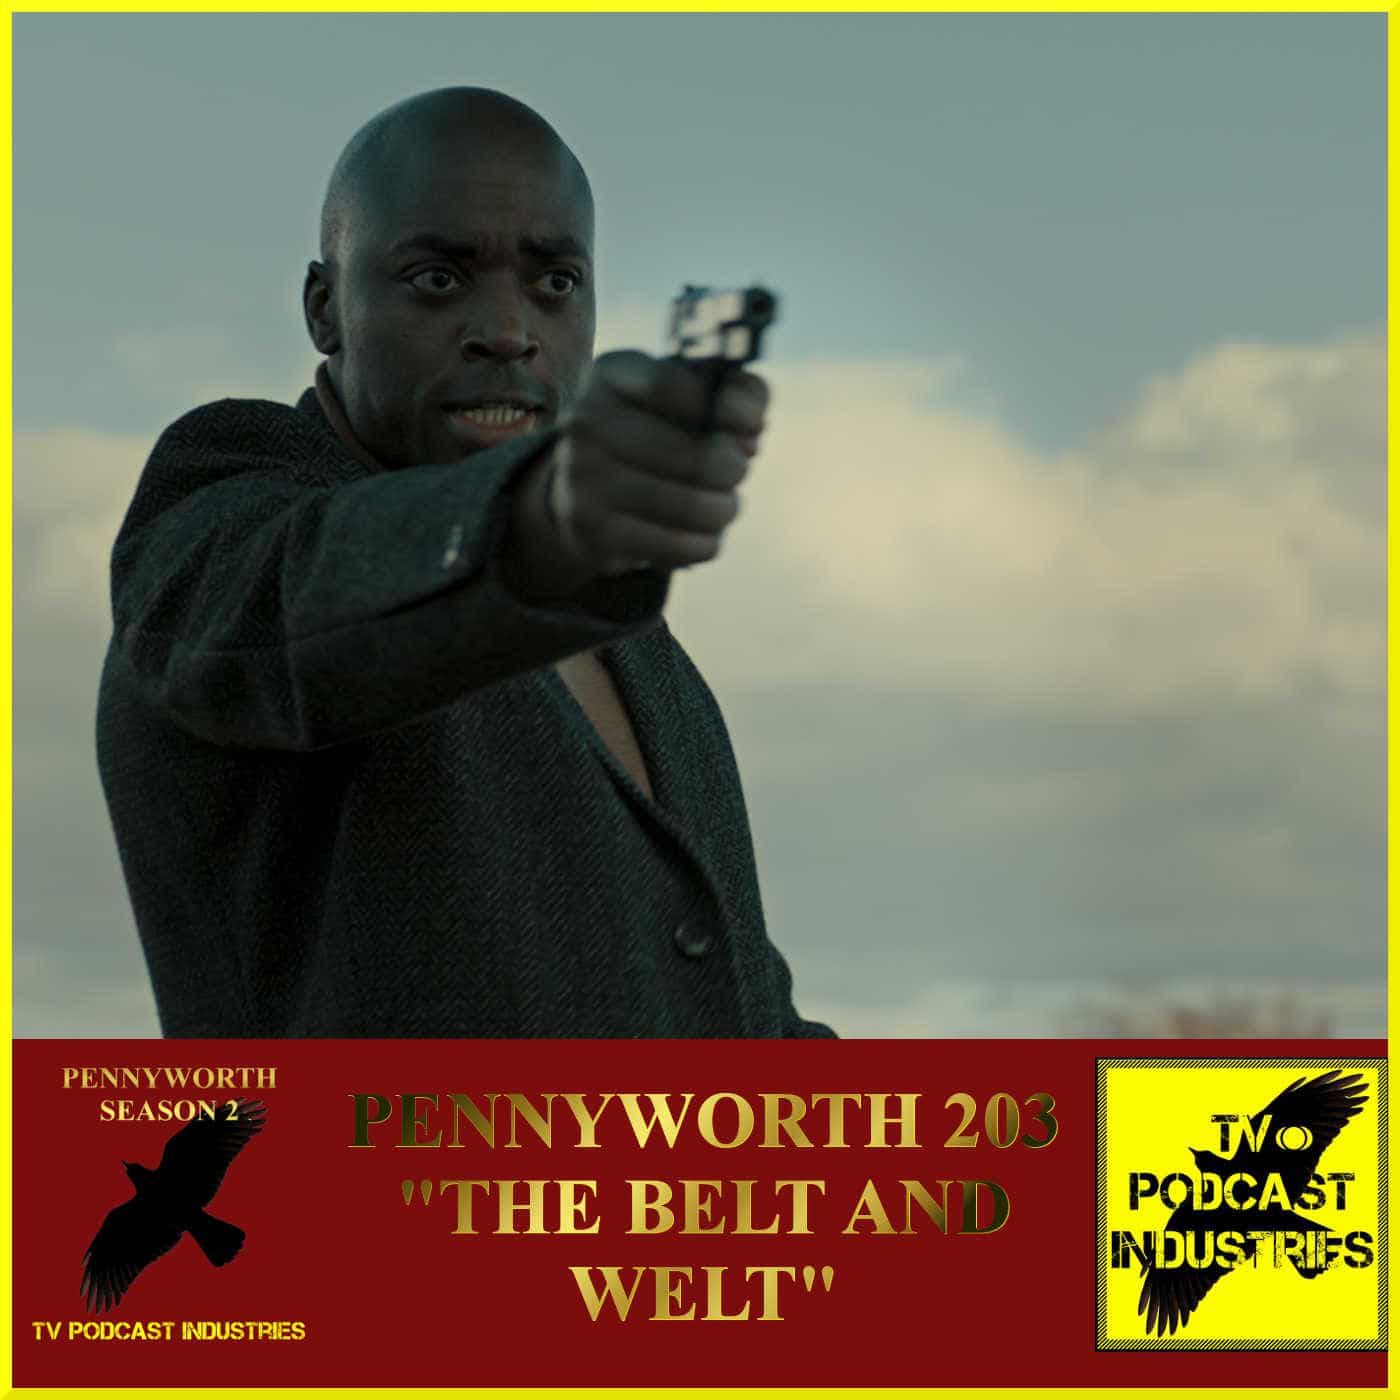 Pennyworth Season 2 Episode 3 "The Belt and Welt" Podcast by TV Podcast Industries